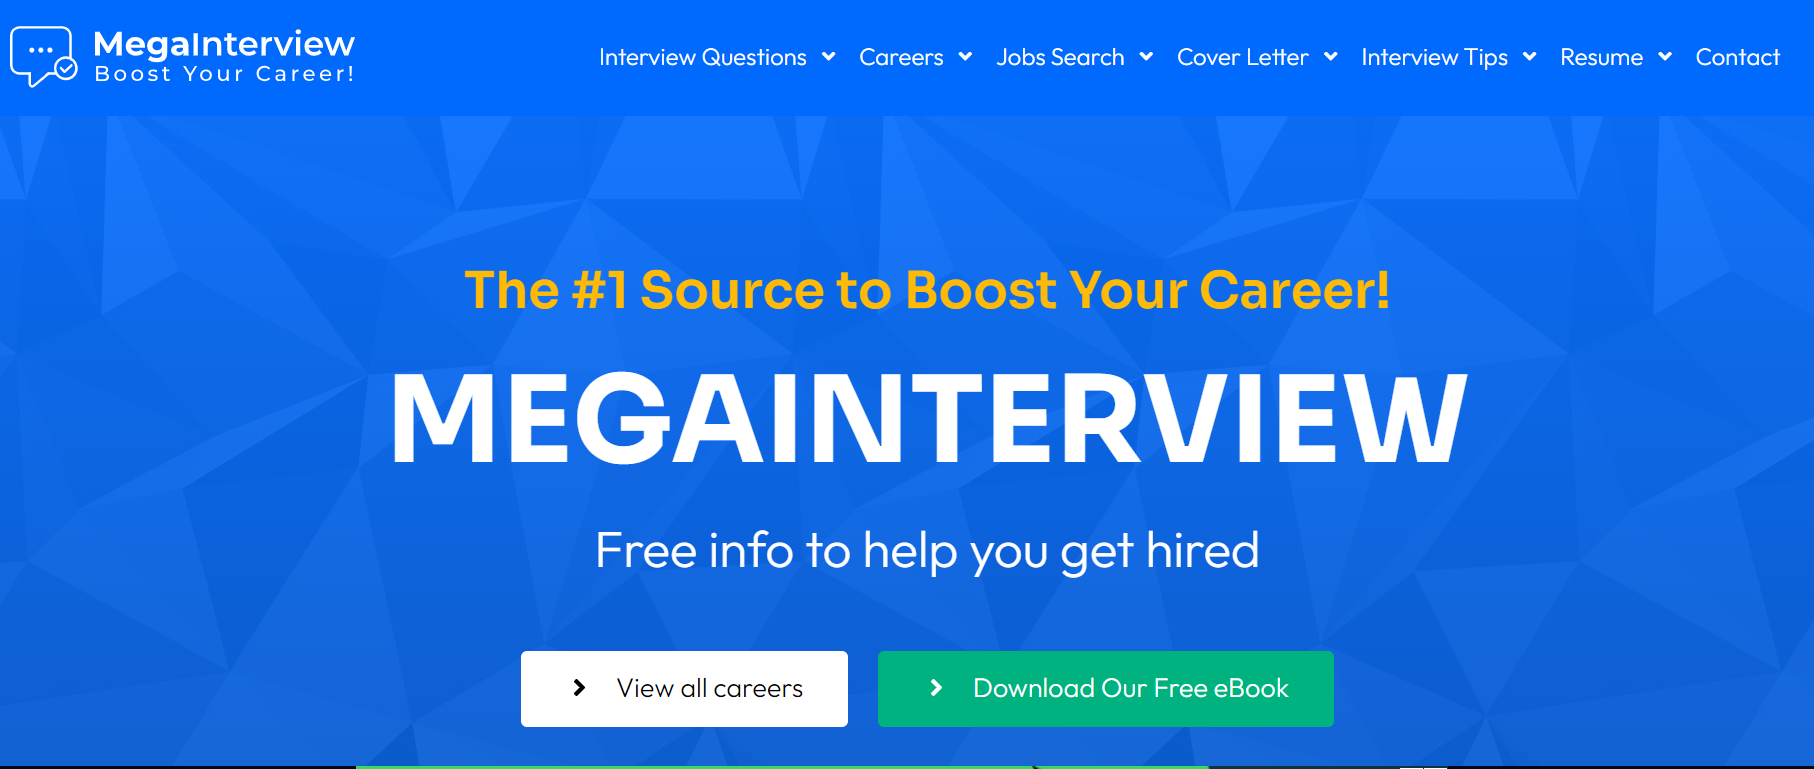 Master Your Interview Skills At MegaInterview.com